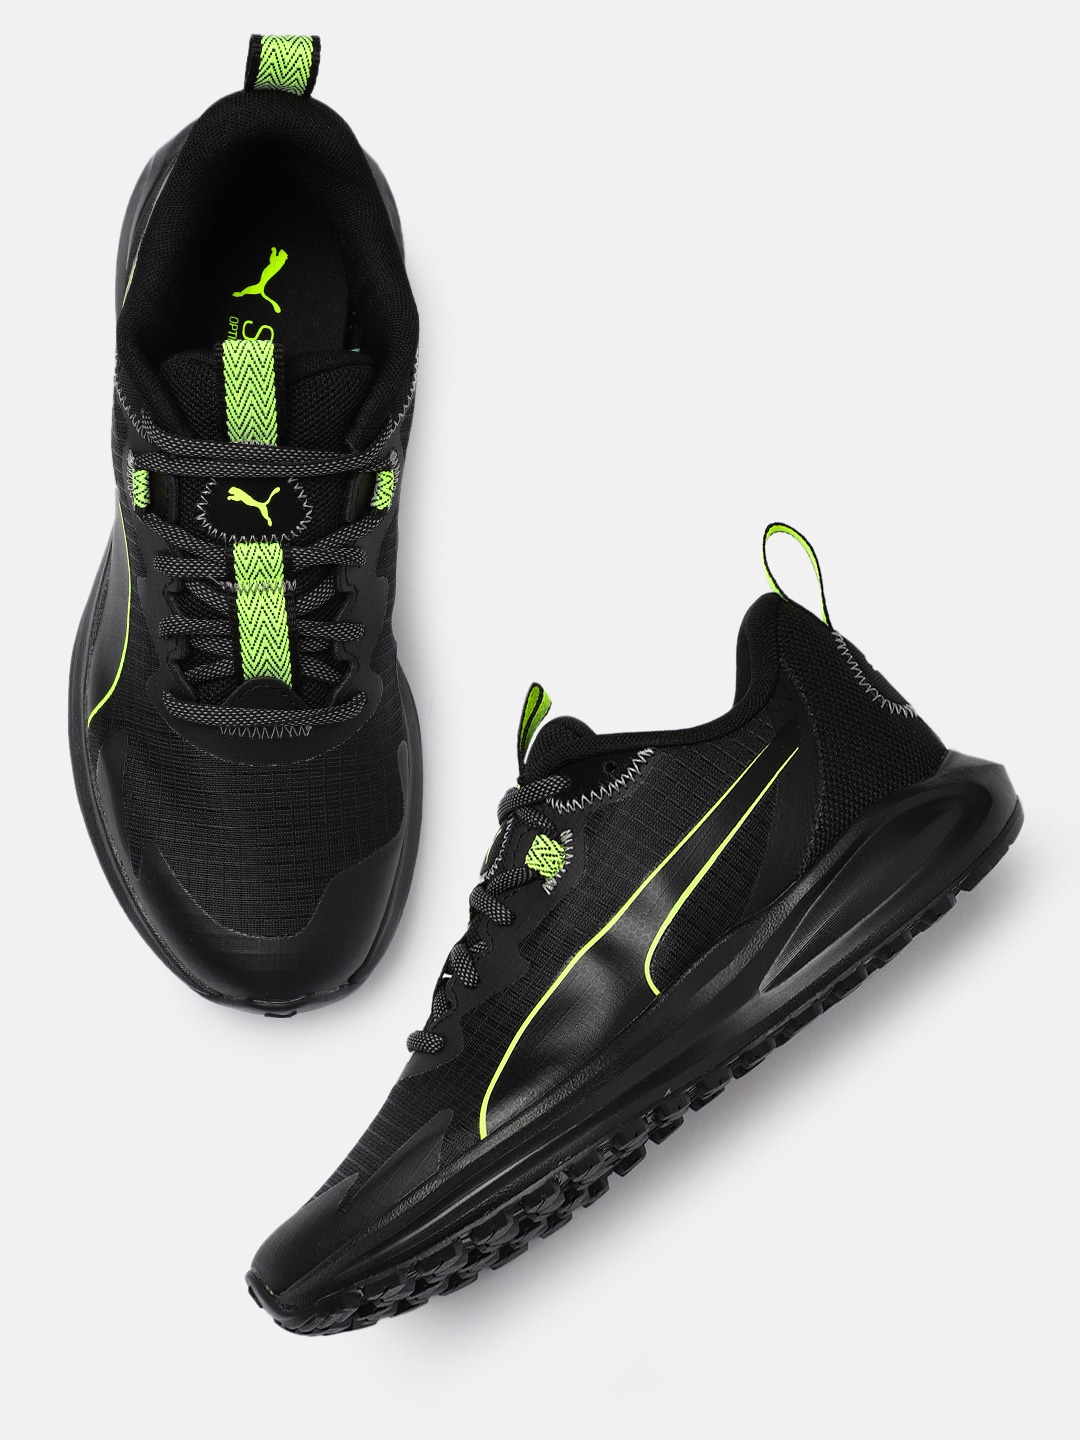 Puma Unisex Black Twitch Running Shoes Price in India